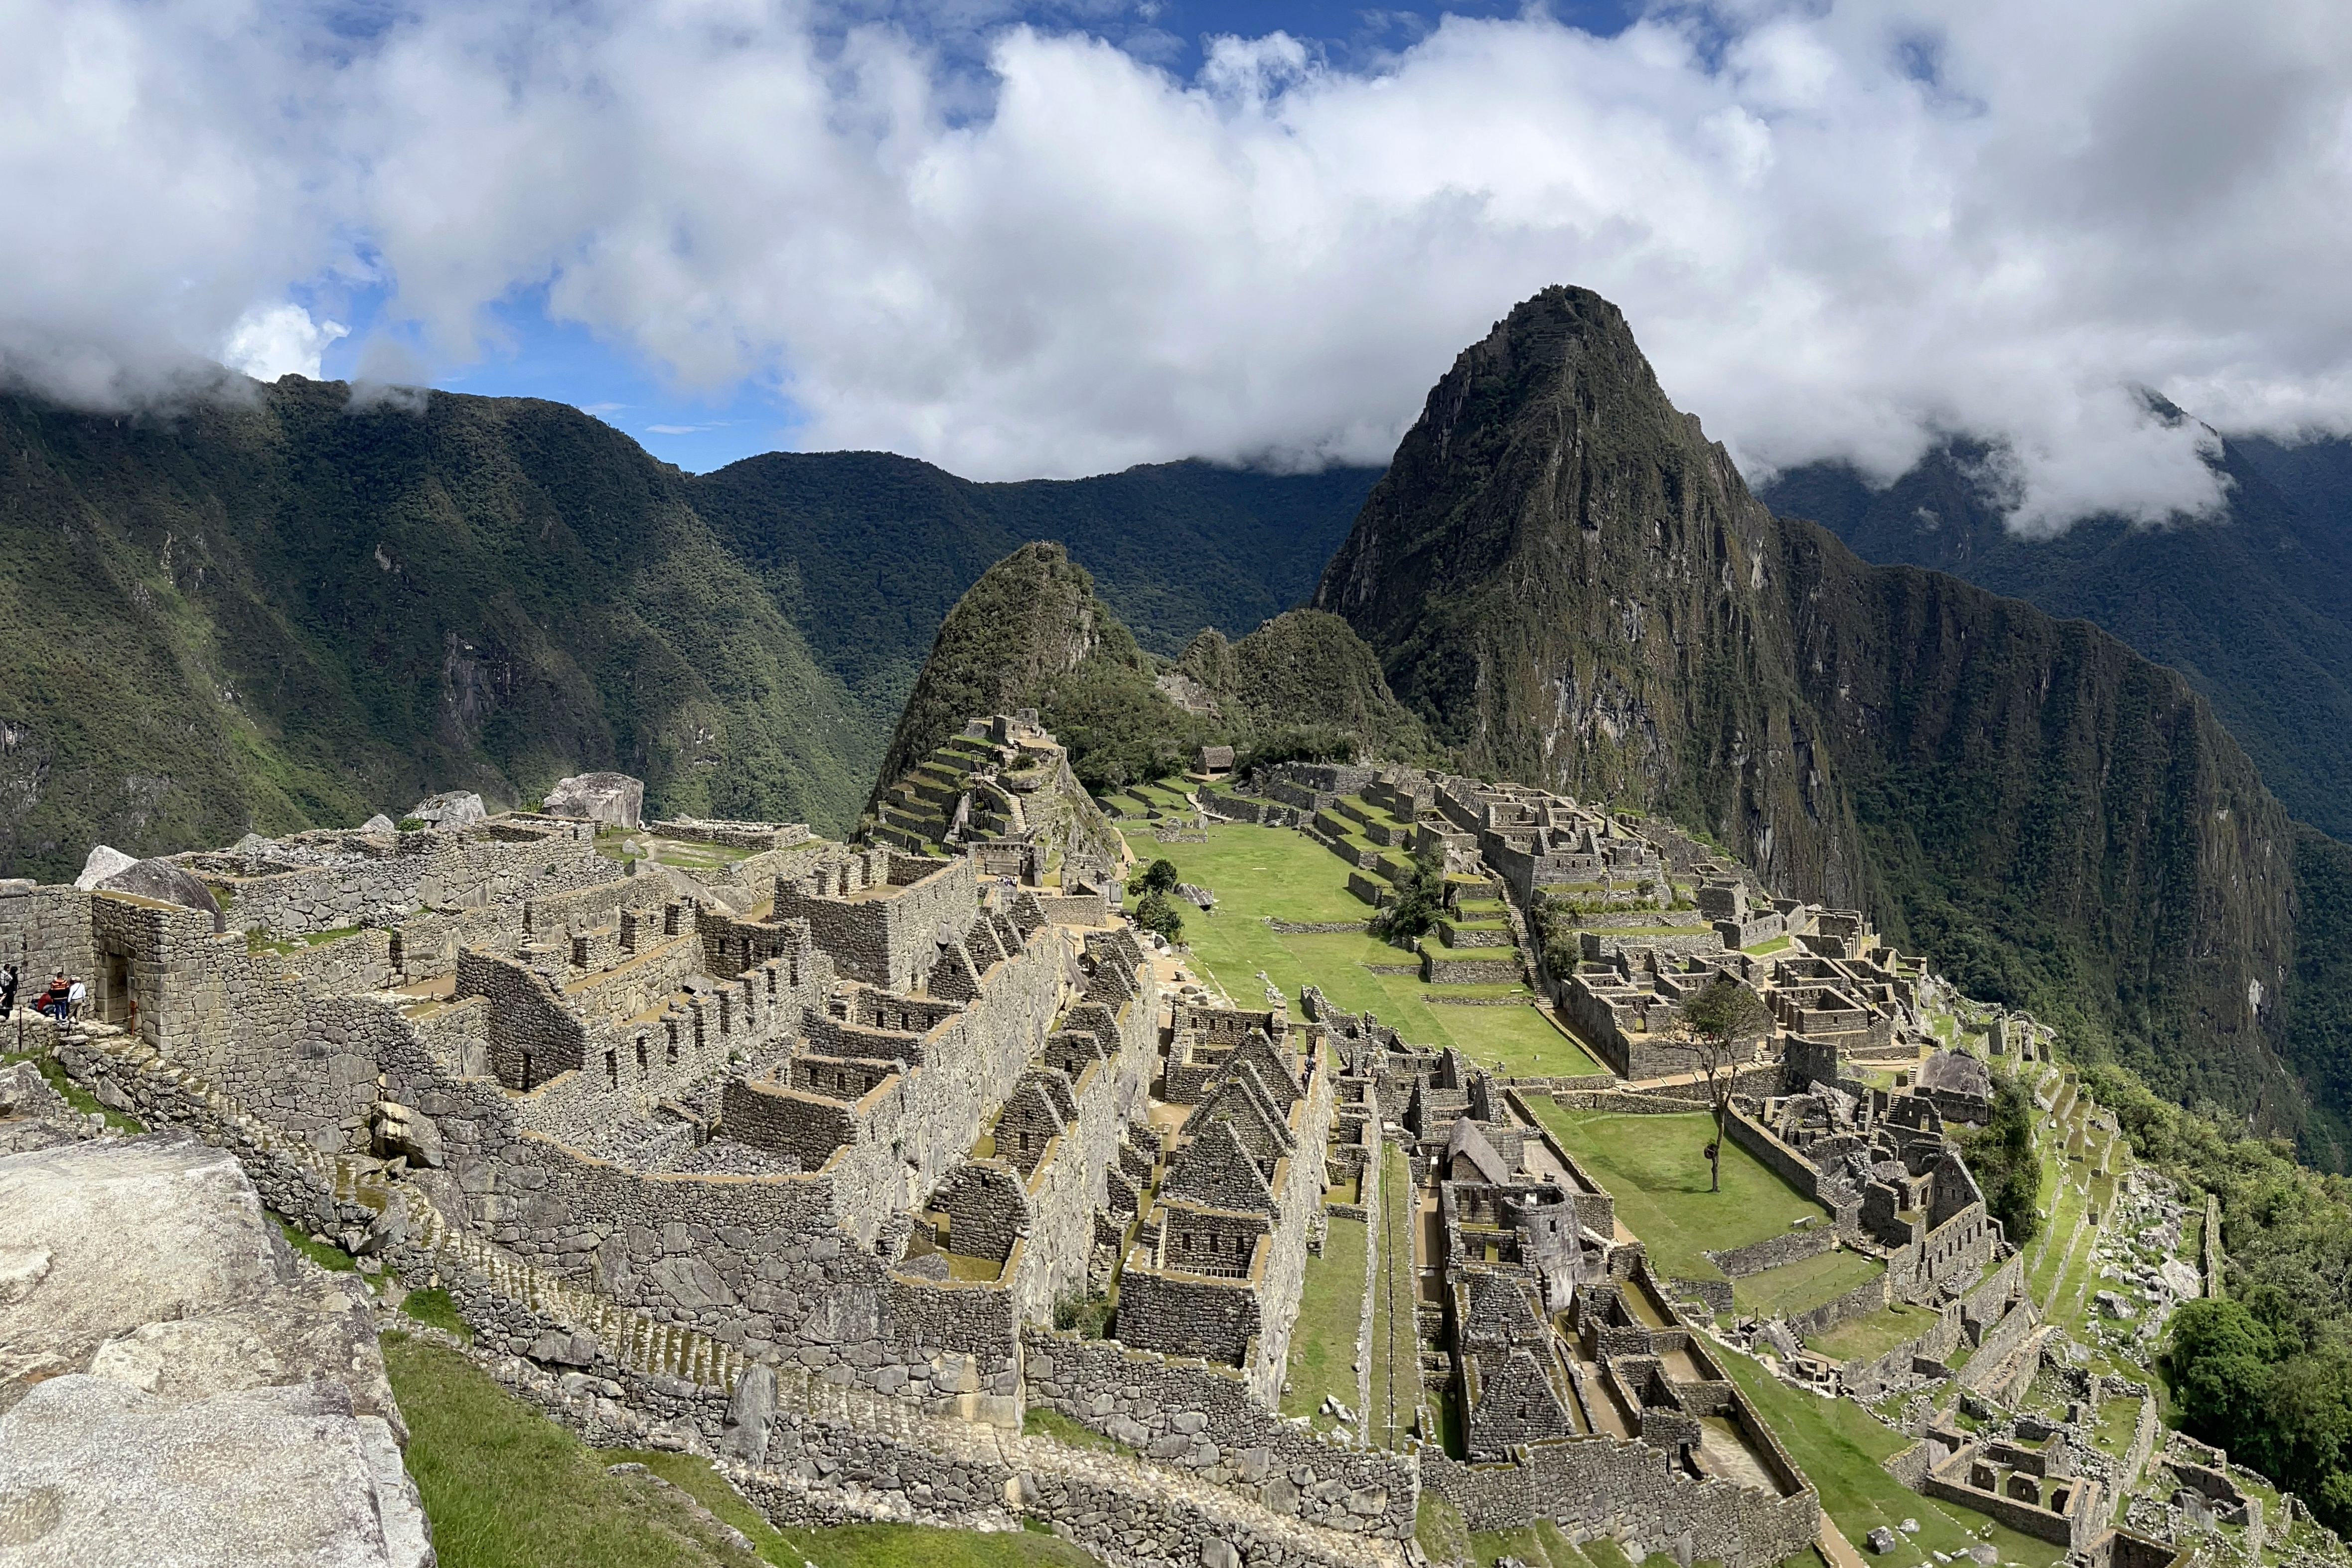 General view of the ancient Inca ruins of Machu Picchu in the Urubamba valley, seventy-two kilometres from the Andes city of Cusco, on February 15, 2023.